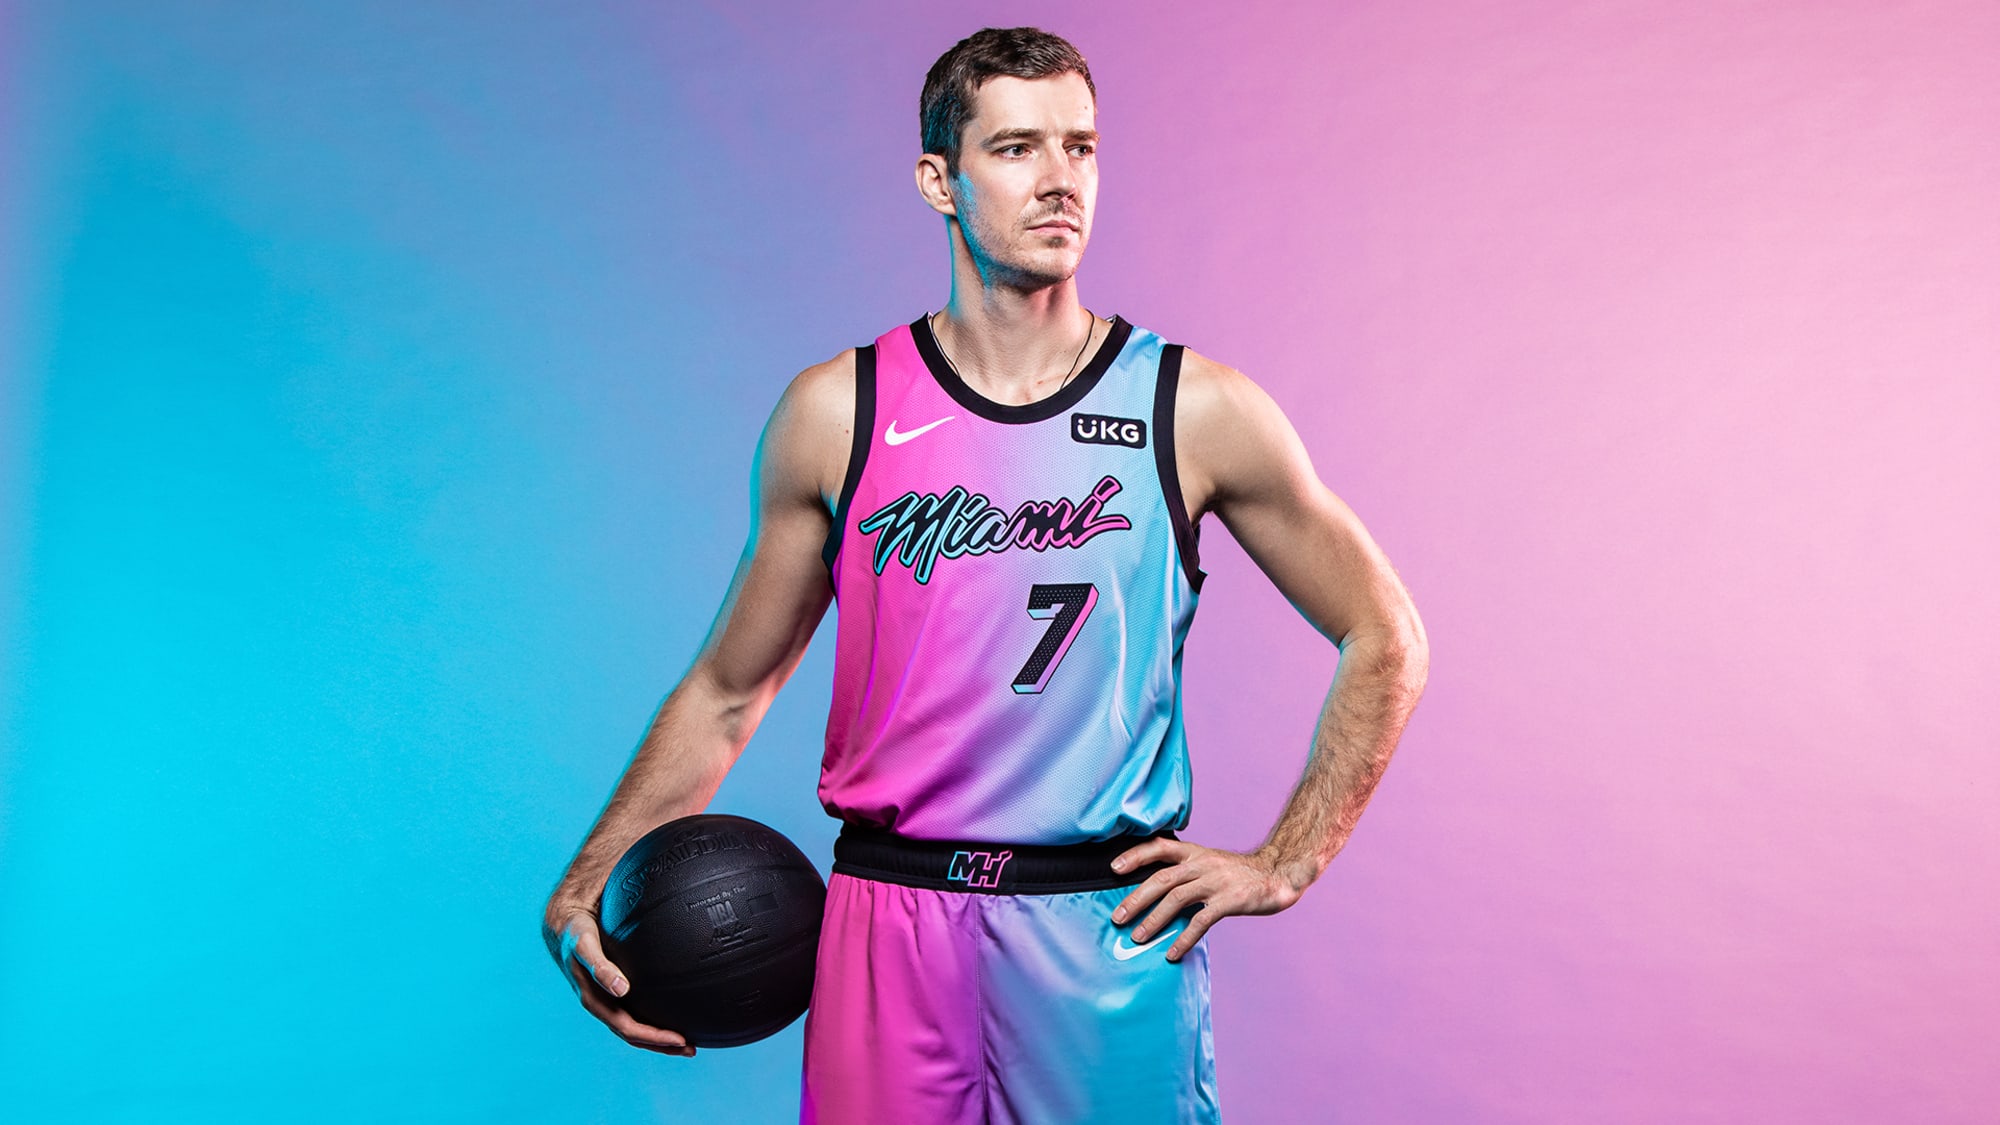 where can i buy a miami heat jersey